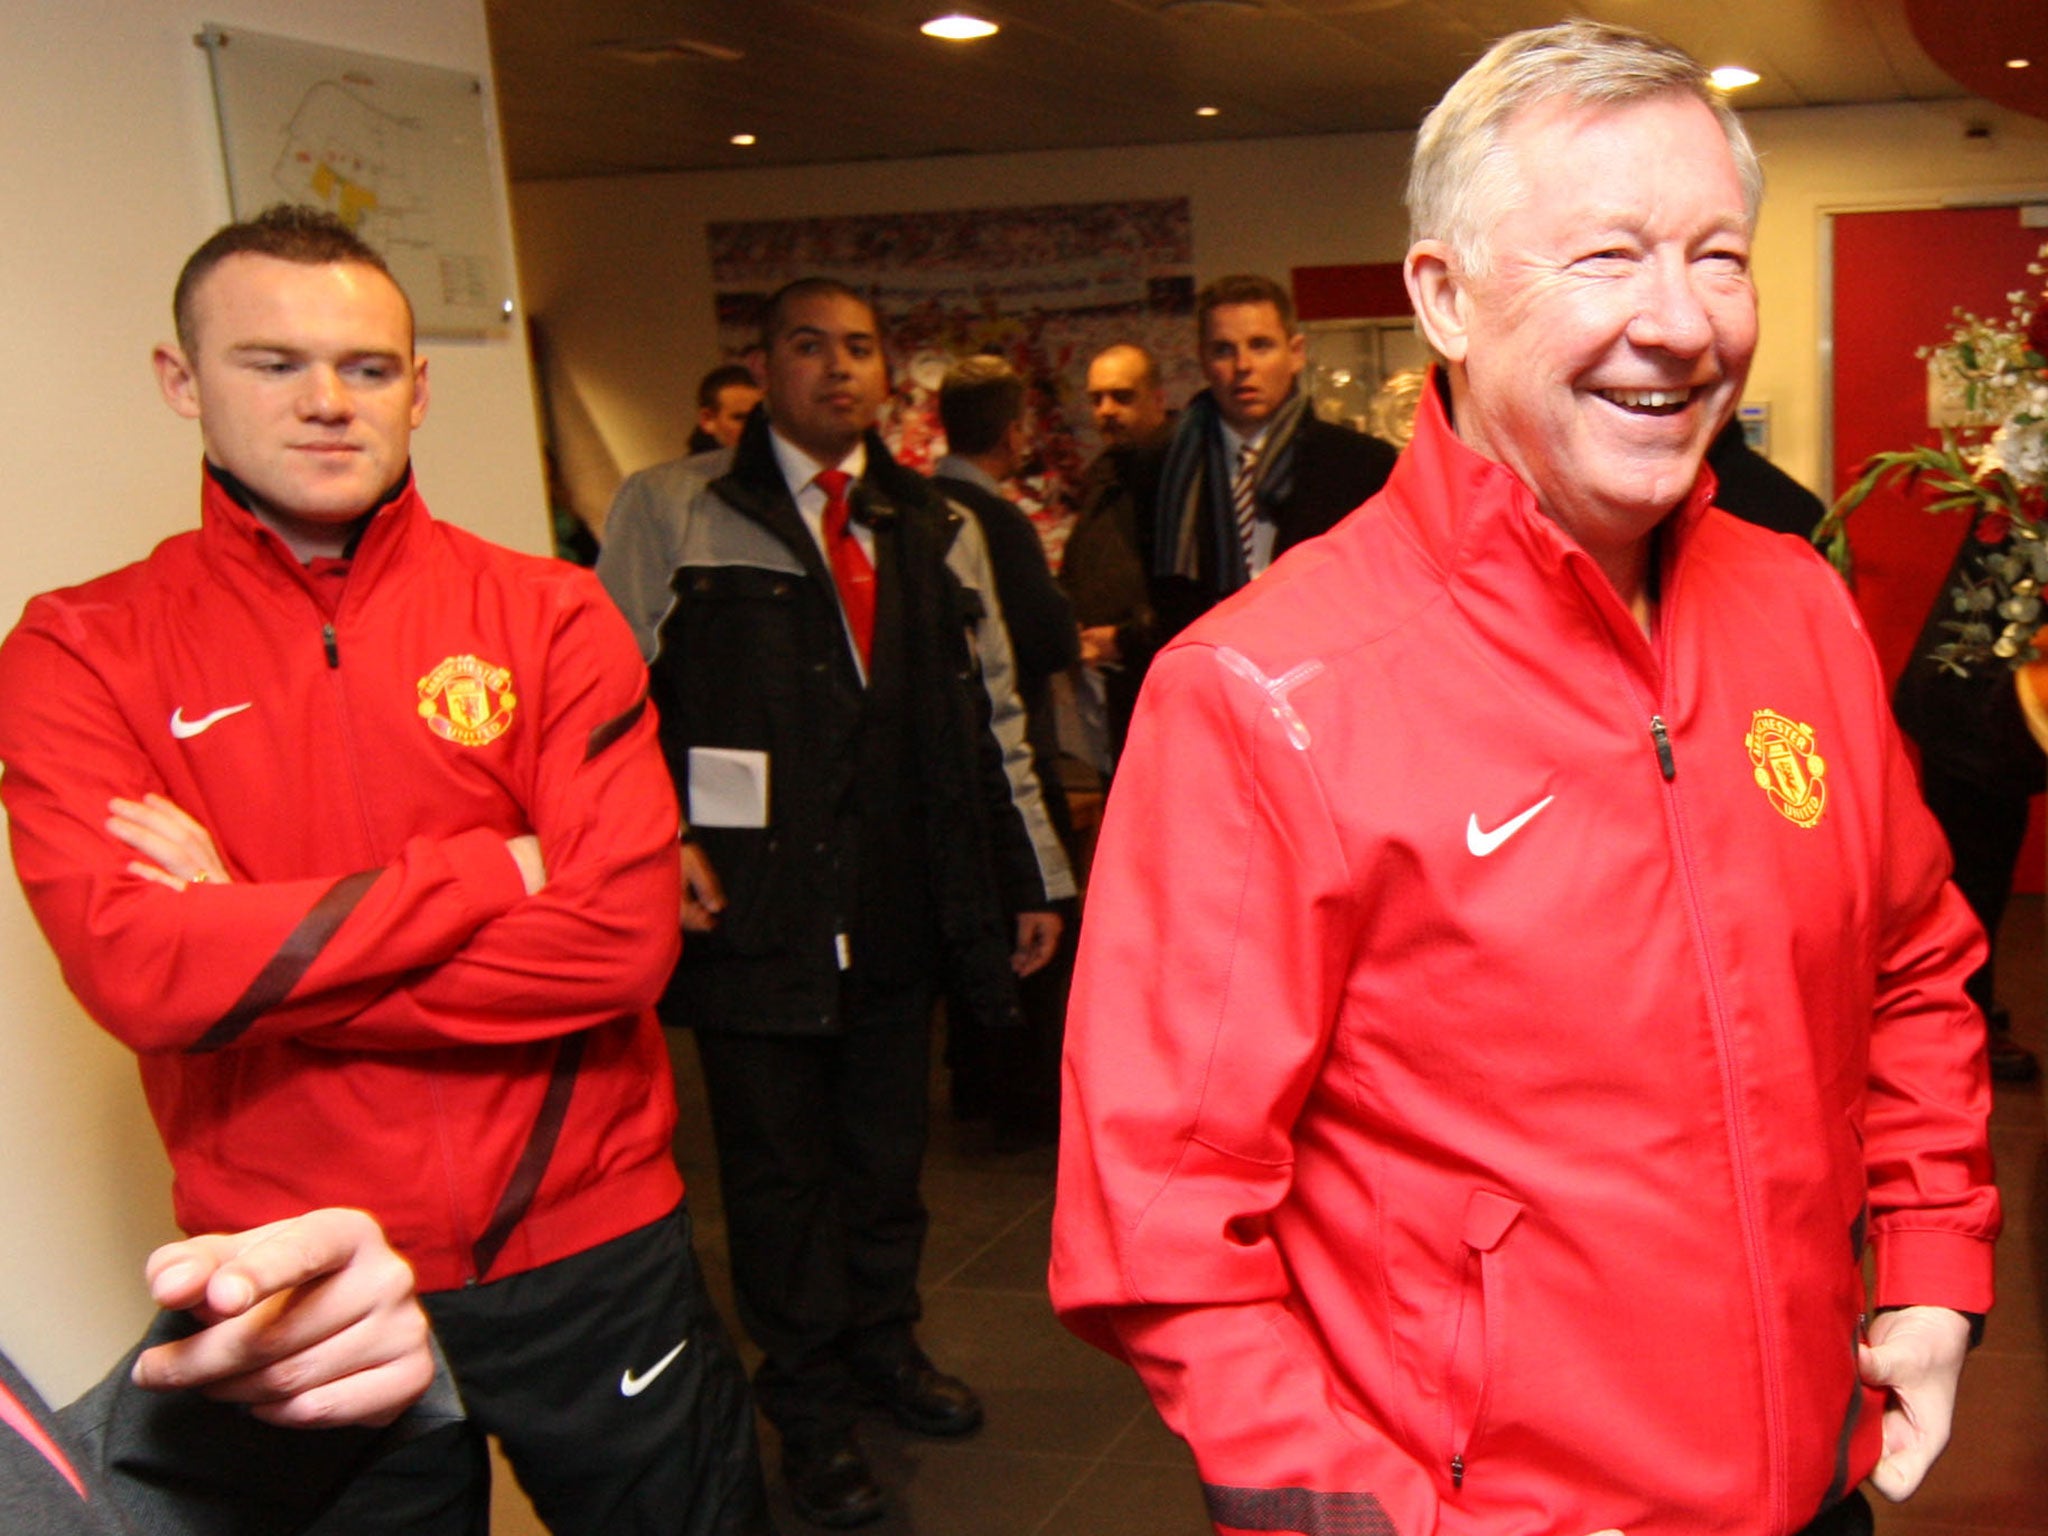 Wayne Rooney and Sir Alex Ferguson during their time together at Manchester United